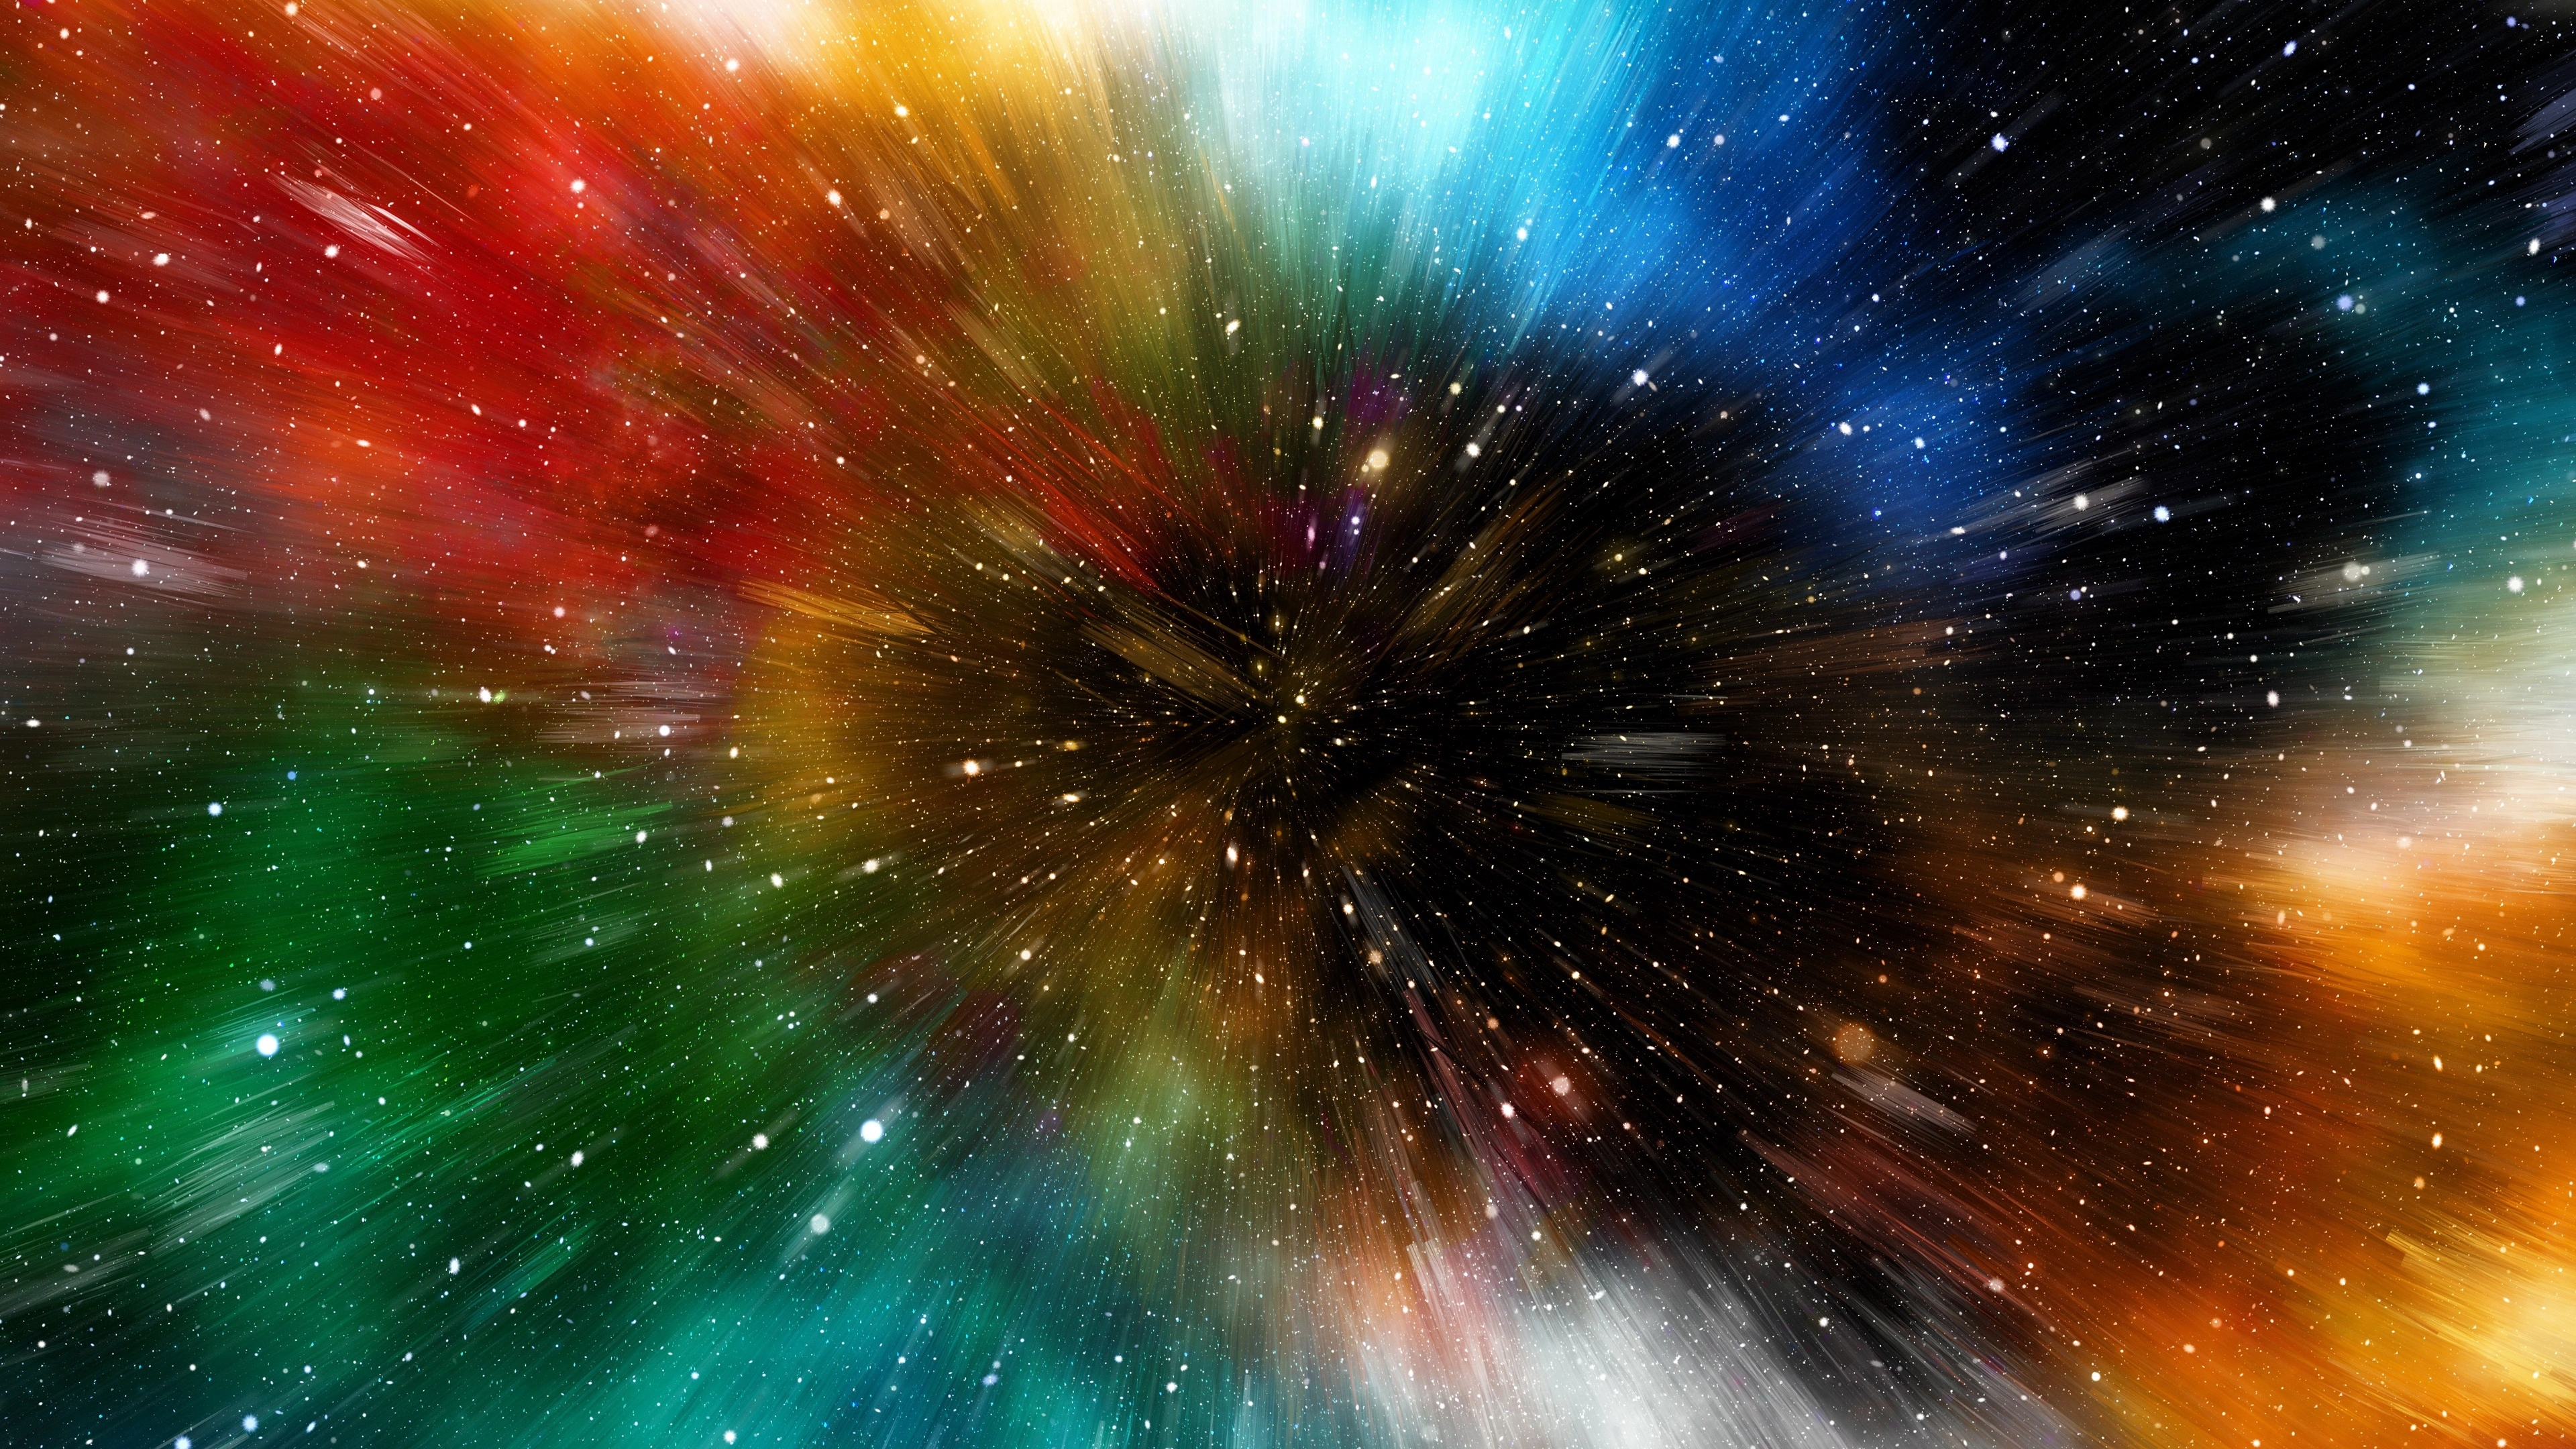 stars motion colorful abstract 1563221538 - Stars Motion Colorful Abstract - stars wallpapers, hd-wallpapers, digital art wallpapers, colorful wallpapers, artwork wallpapers, artist wallpapers, abstract wallpapers, 4k-wallpapers